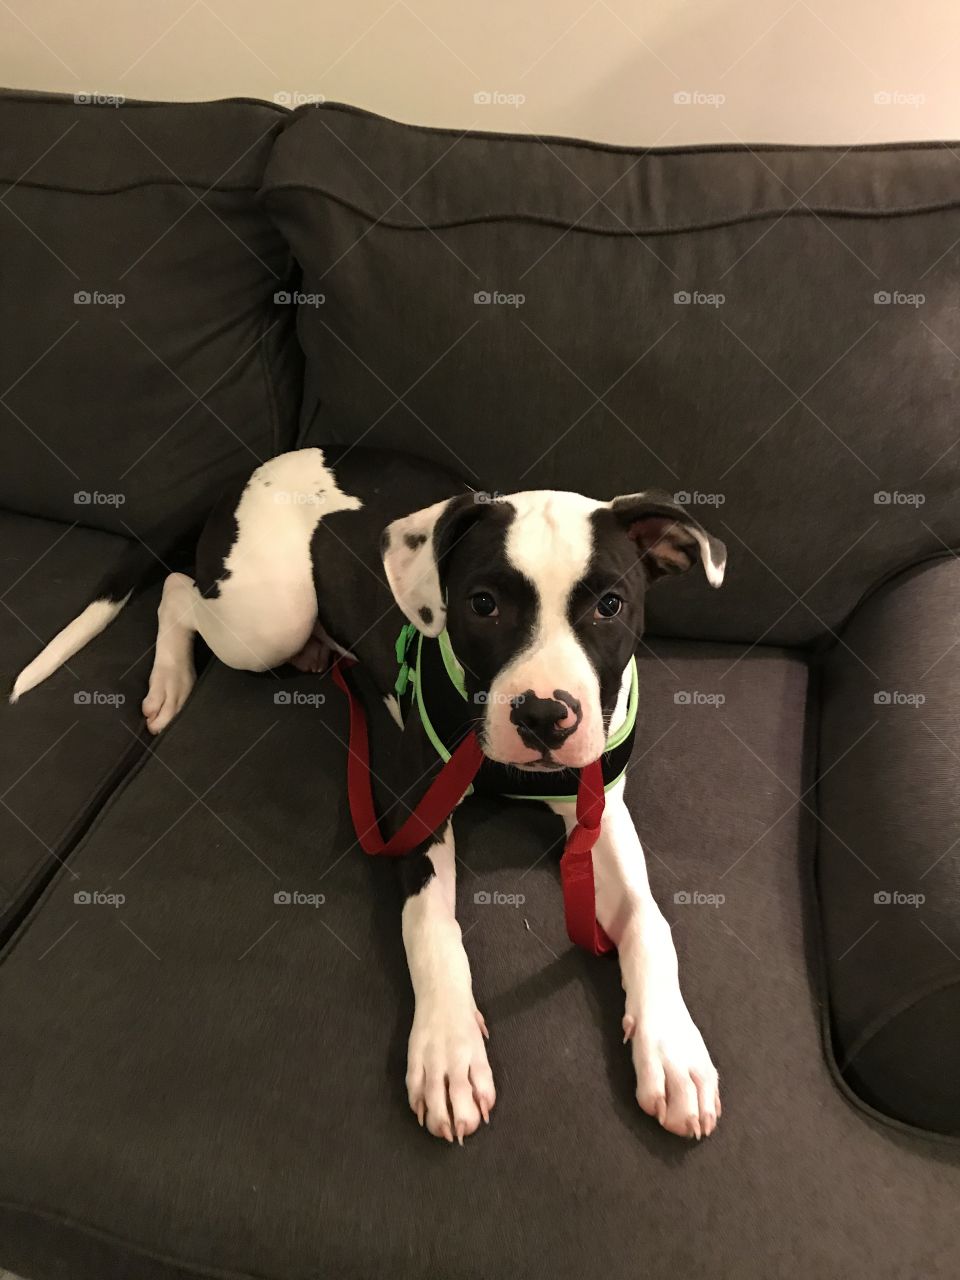 Barley, our 4 month old puppy likes to walk himself! Every time he wants to go out he sits in this spot and gives us those eyes. He is ready to go!